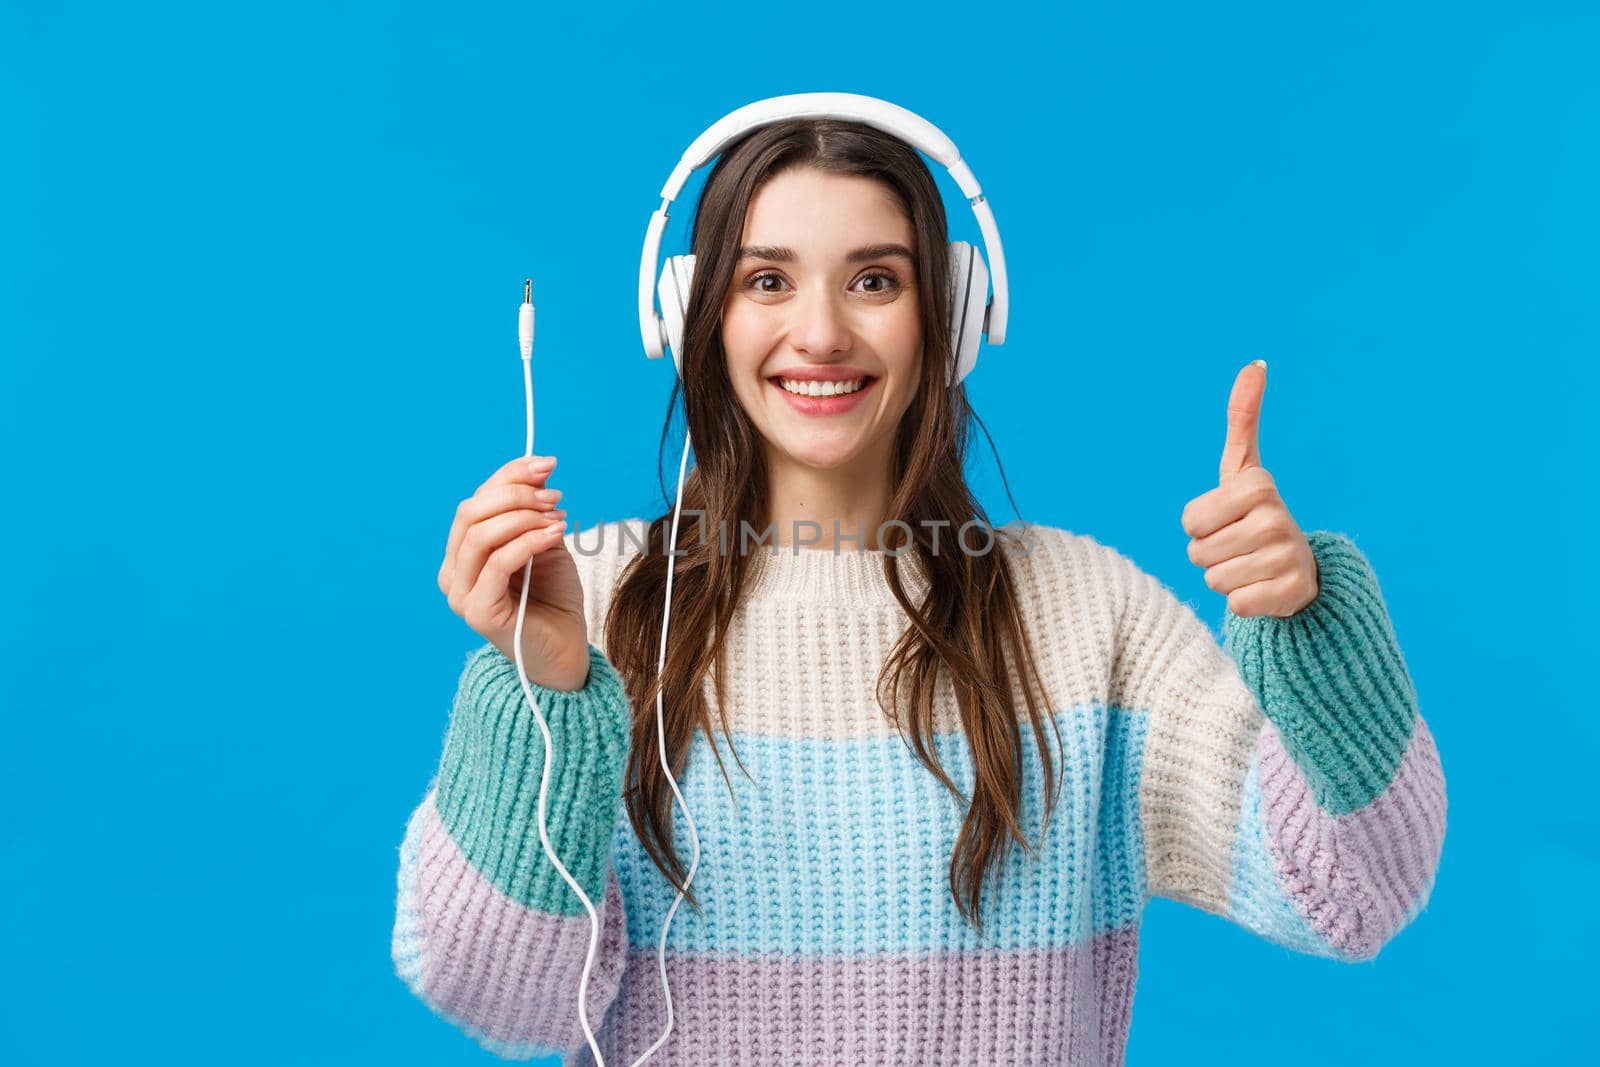 Waist-up portrait cheerful, excited young woman smiling, showing thumb-up in approval, like as received awesome present, wearing new headphones, holding wire and grinning.